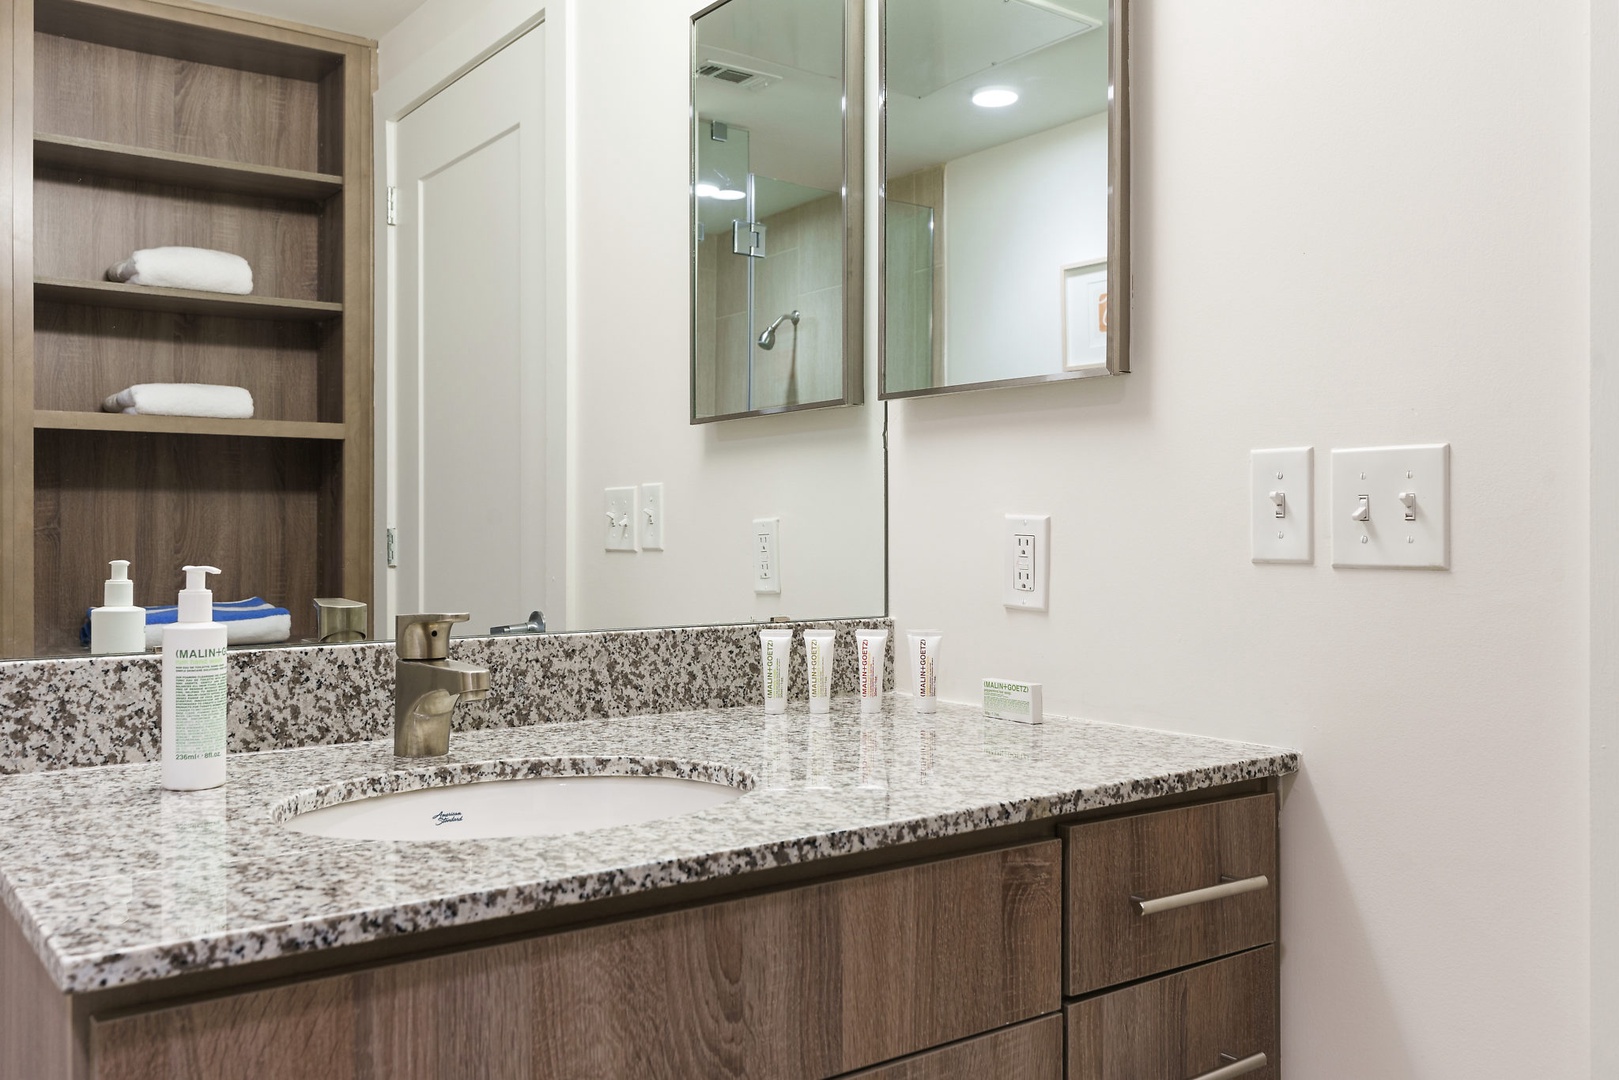 Prepare for the day in the modern bathroom with complimentary toiletries.